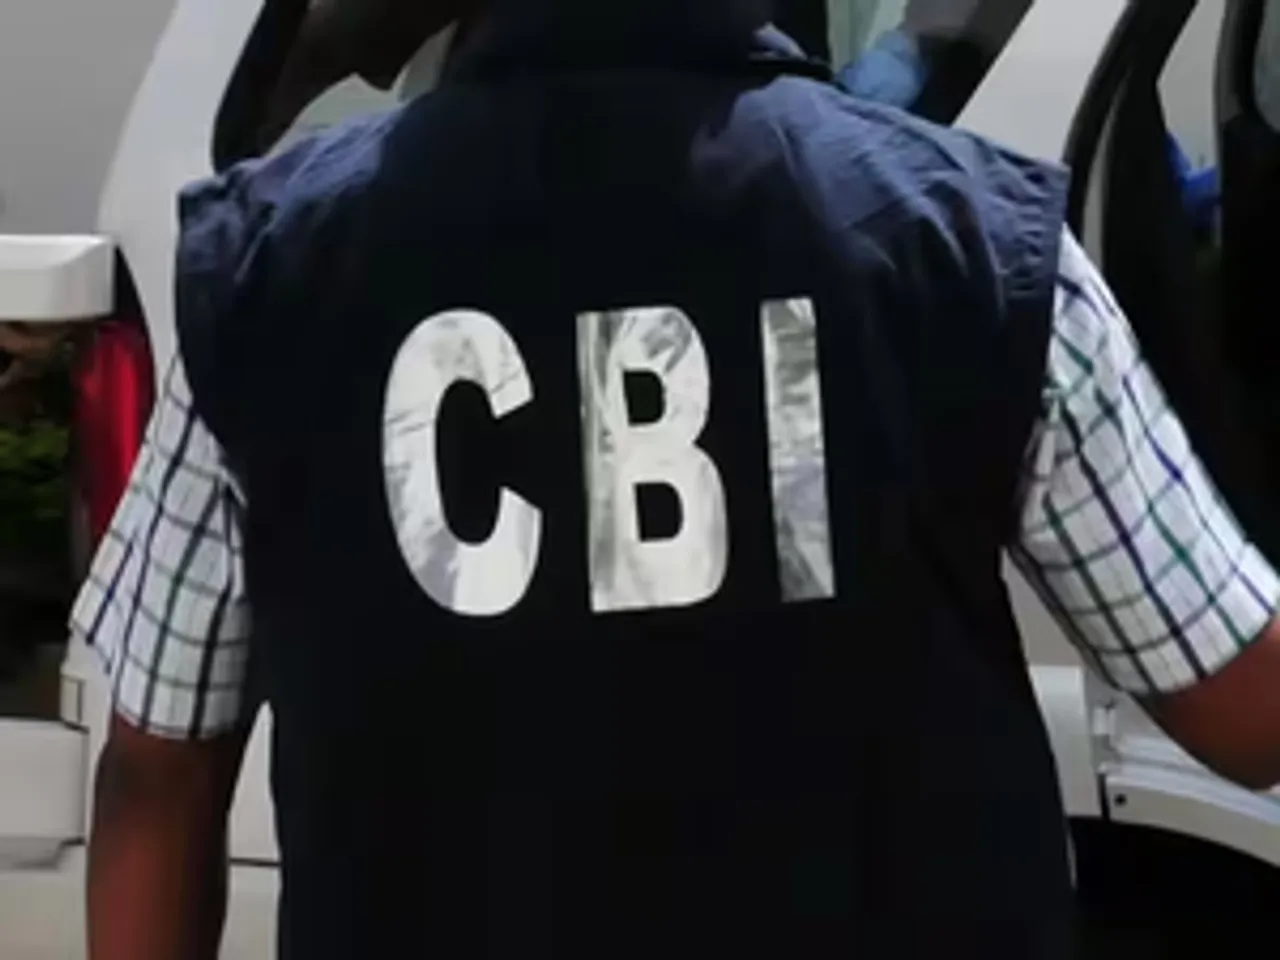 hindi-cbi-track-ammunition-hop-where-from-bullet-cartridge-recovered-from-andehkhali-on-friday-were-